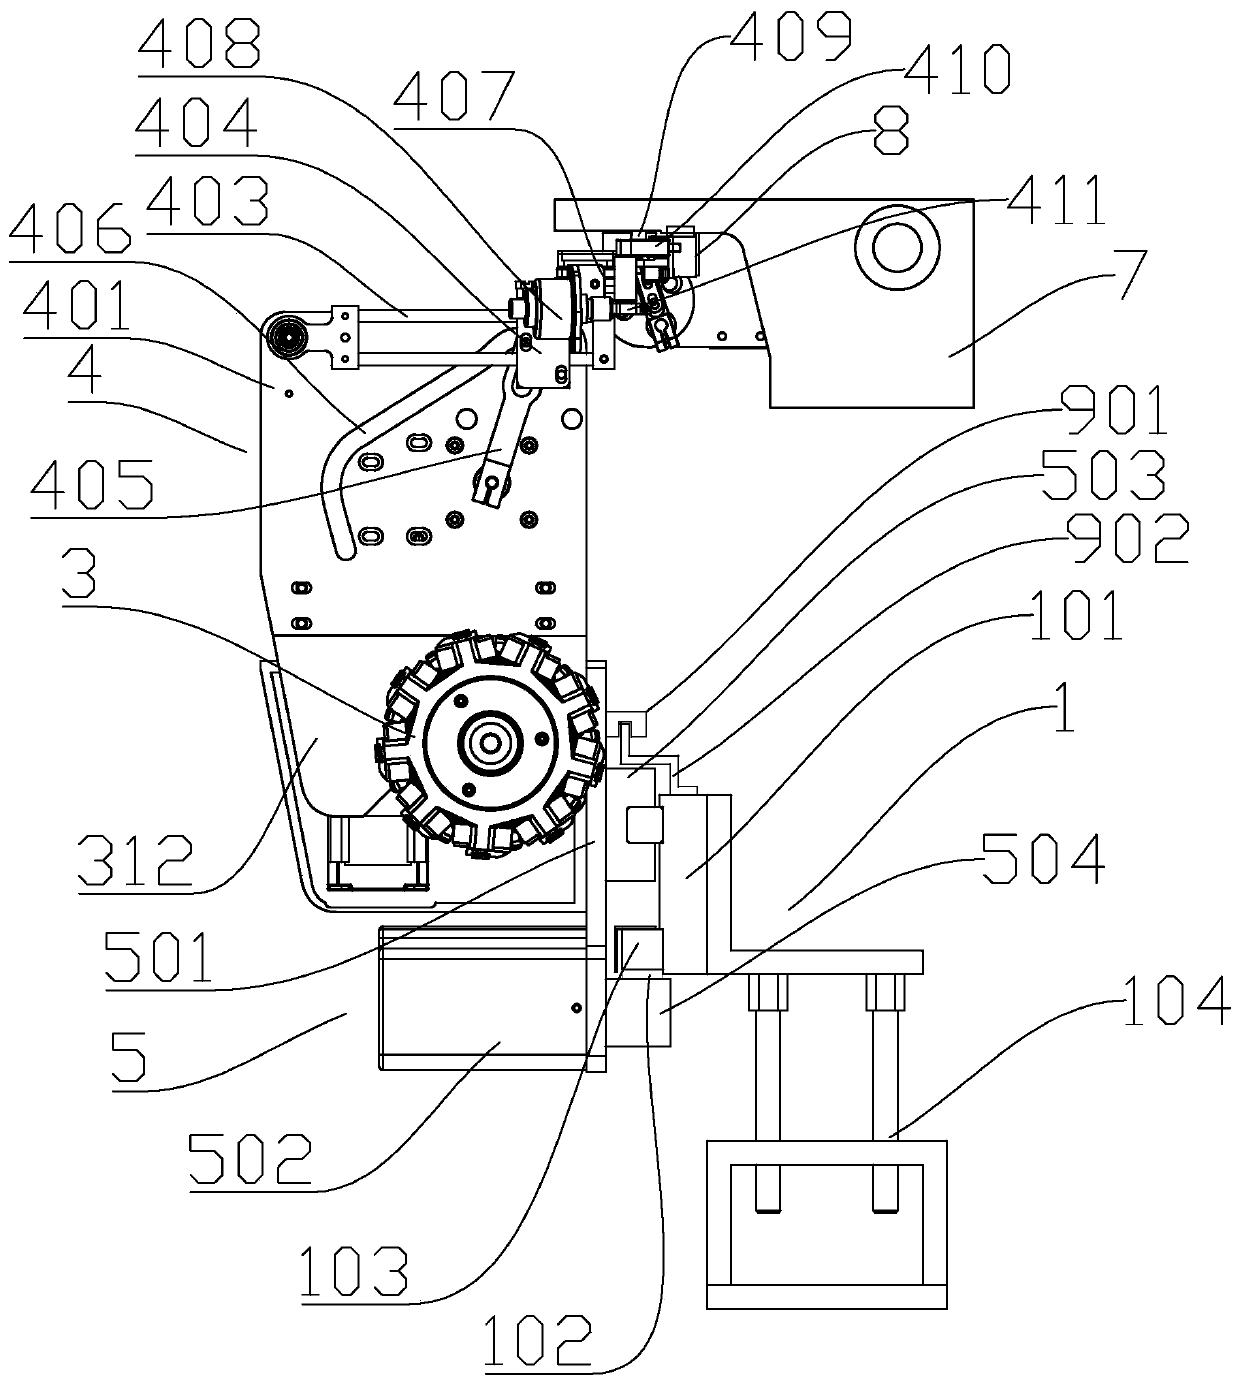 Multi-station automatic bobbin case replacing system and method